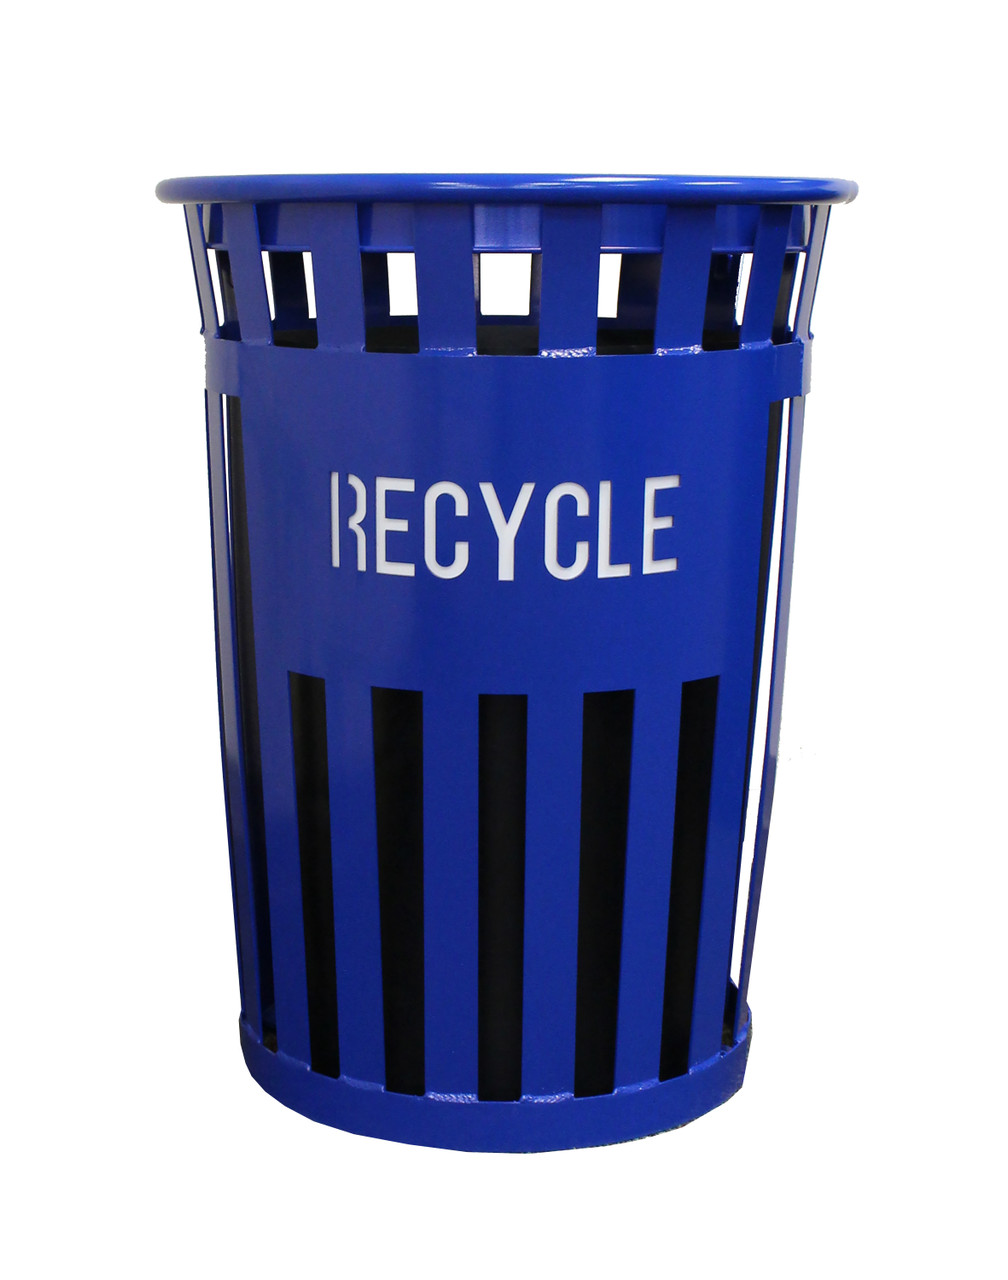 36 Gallon Eco Series M3601RE-BL Blue Trash Can with RECYCLE Laser Cut Message